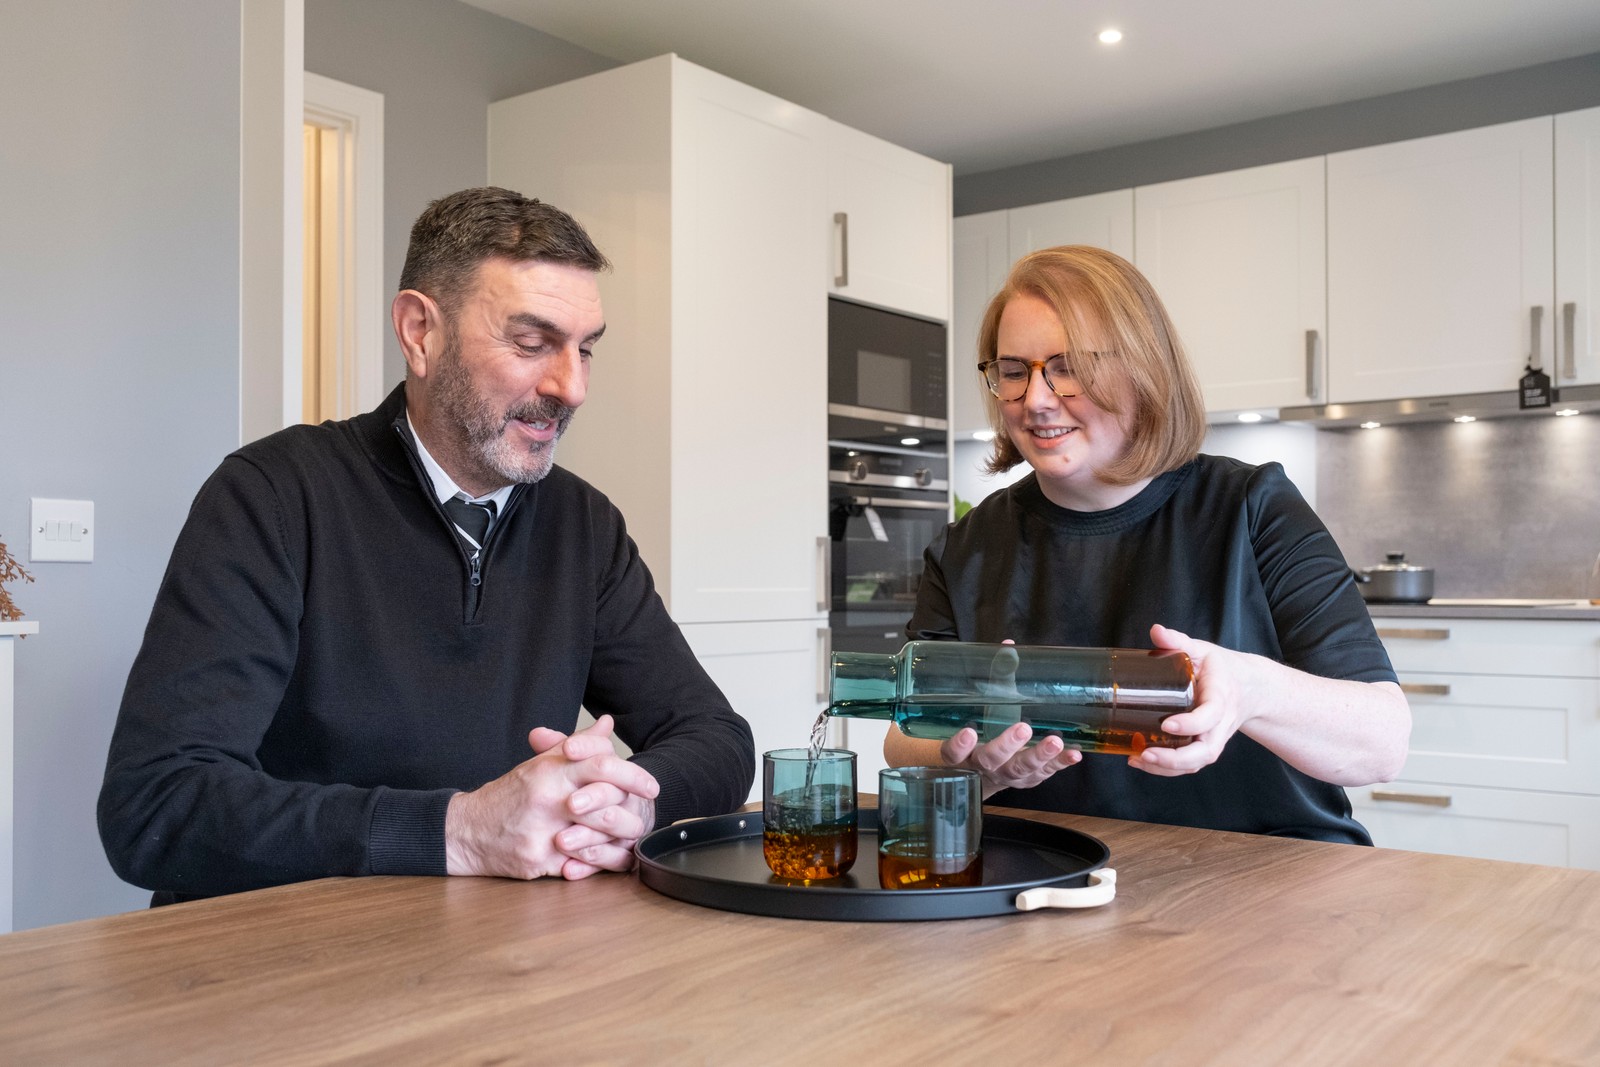 Cala Homes announces programme of community support in West Edinburgh